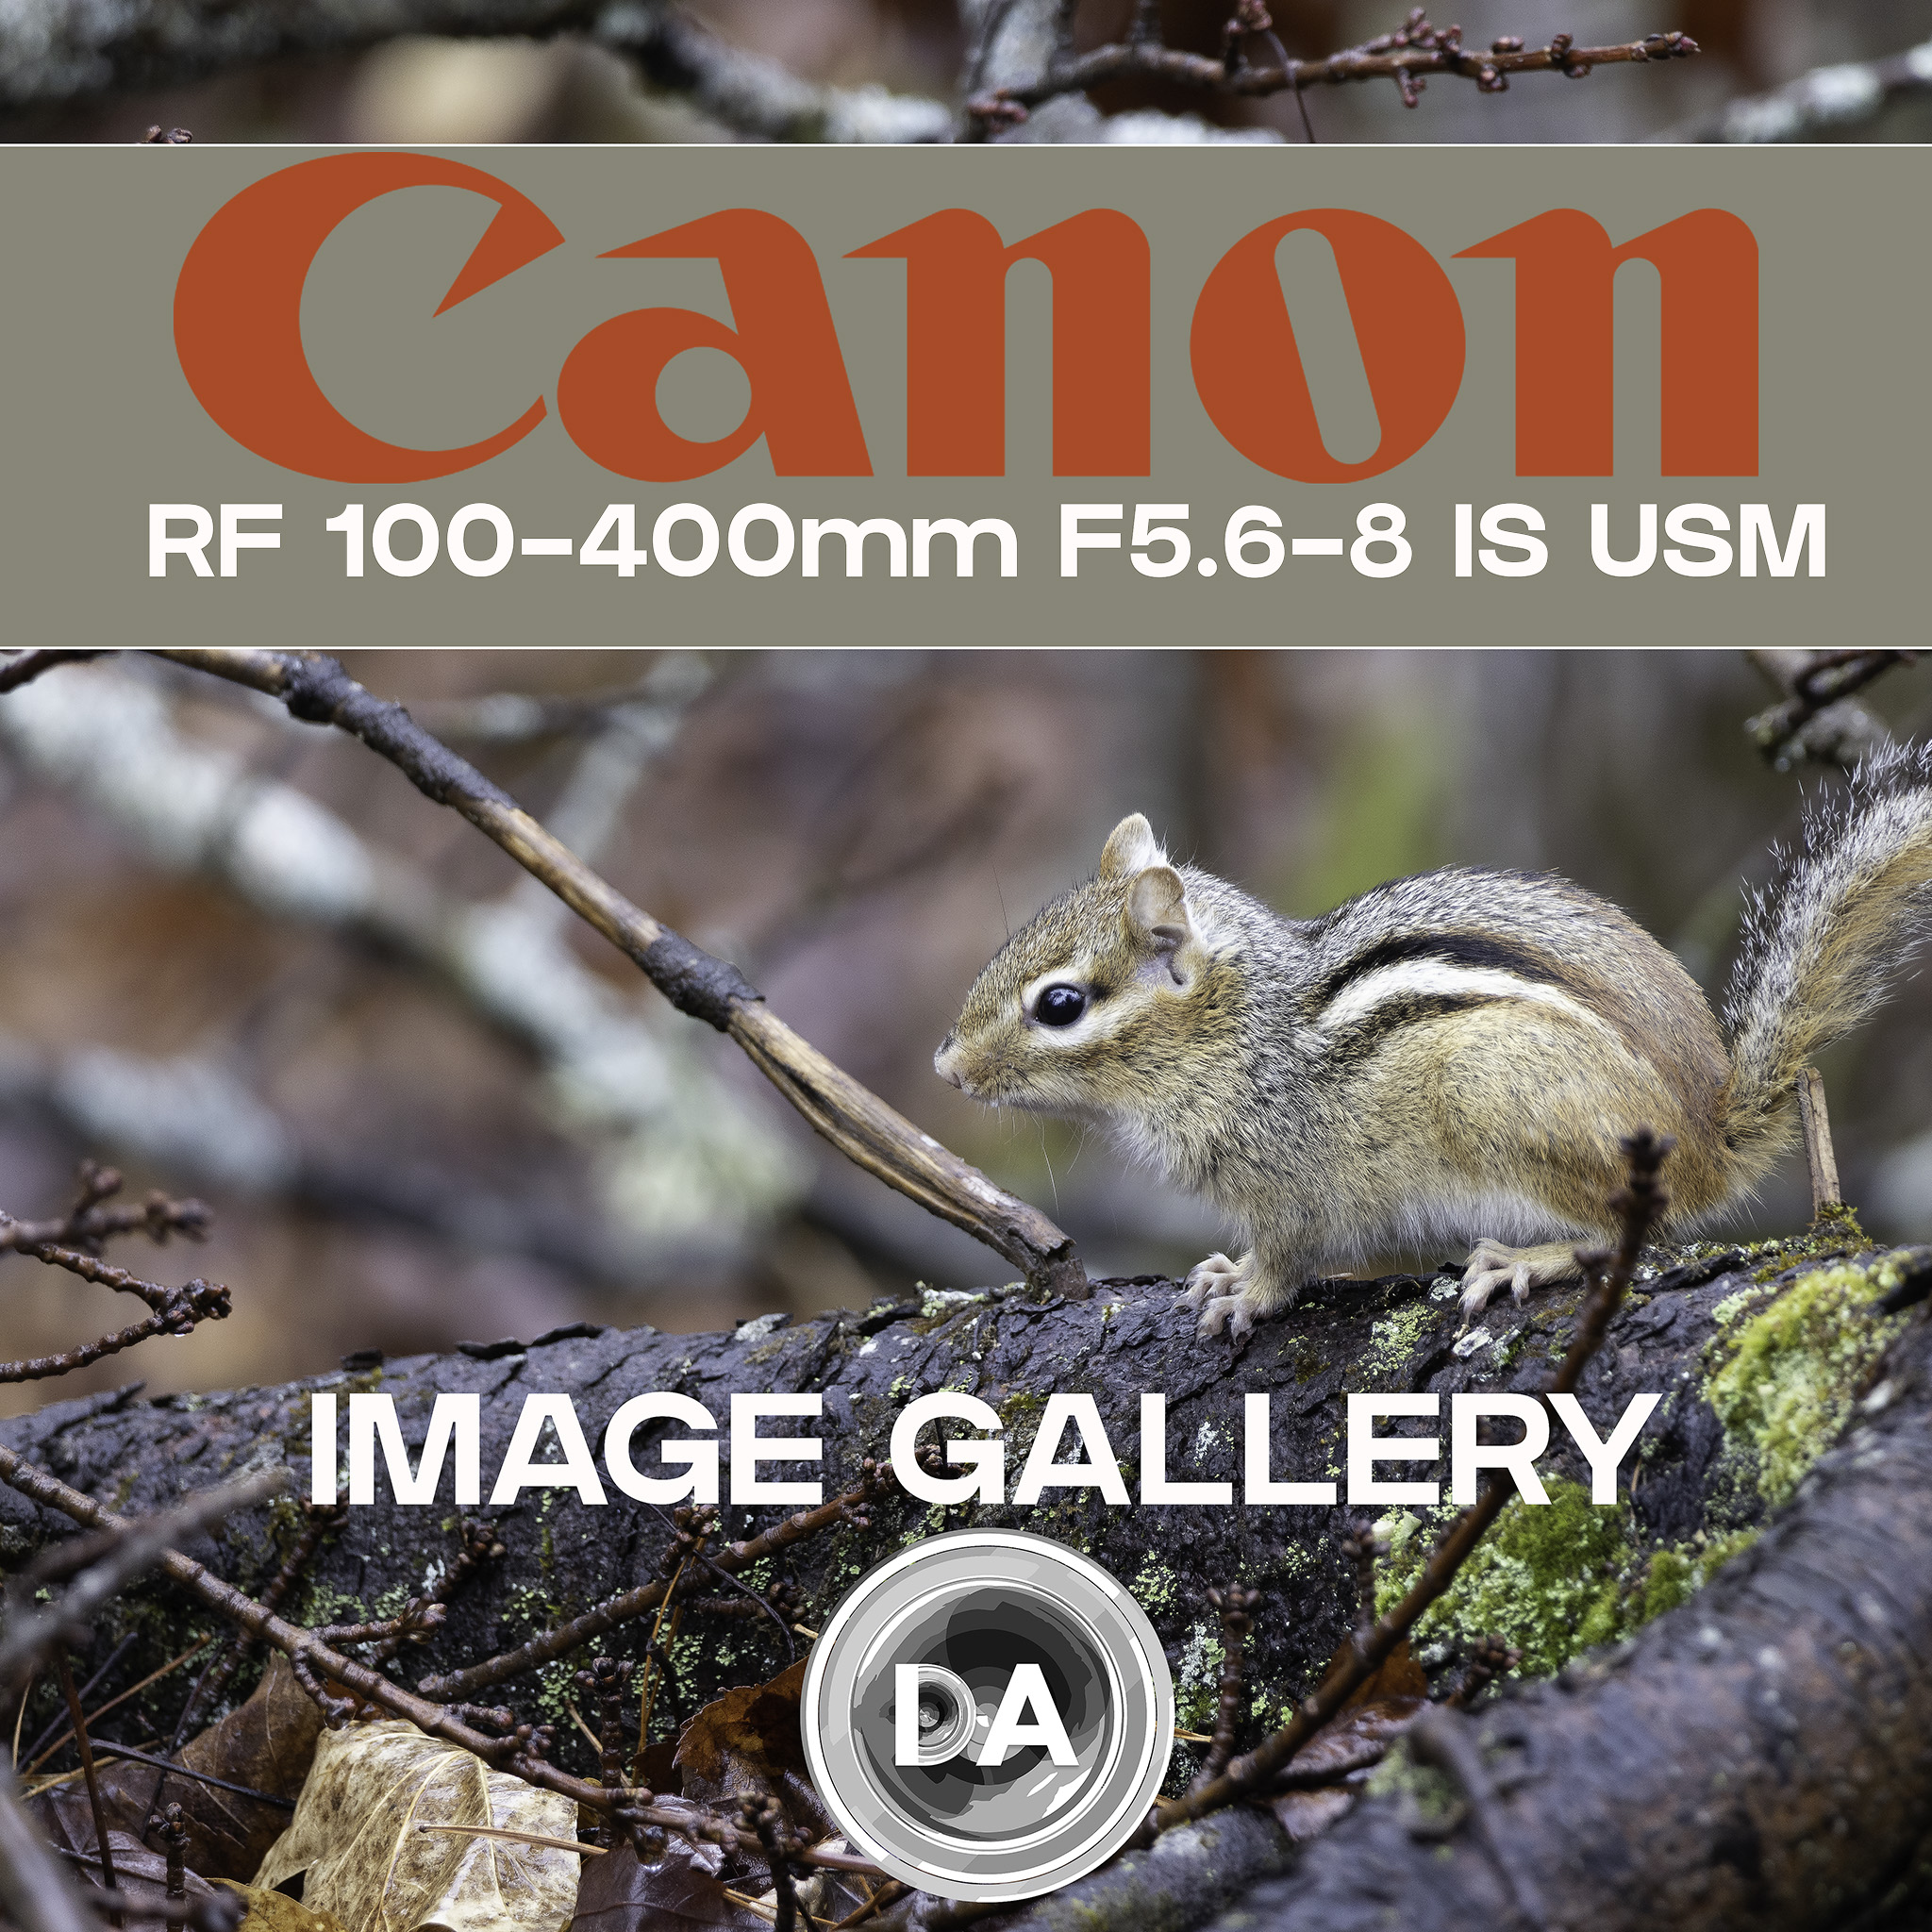 Canon RF 100-400mm F5.6-8 USM IS Image Gallery